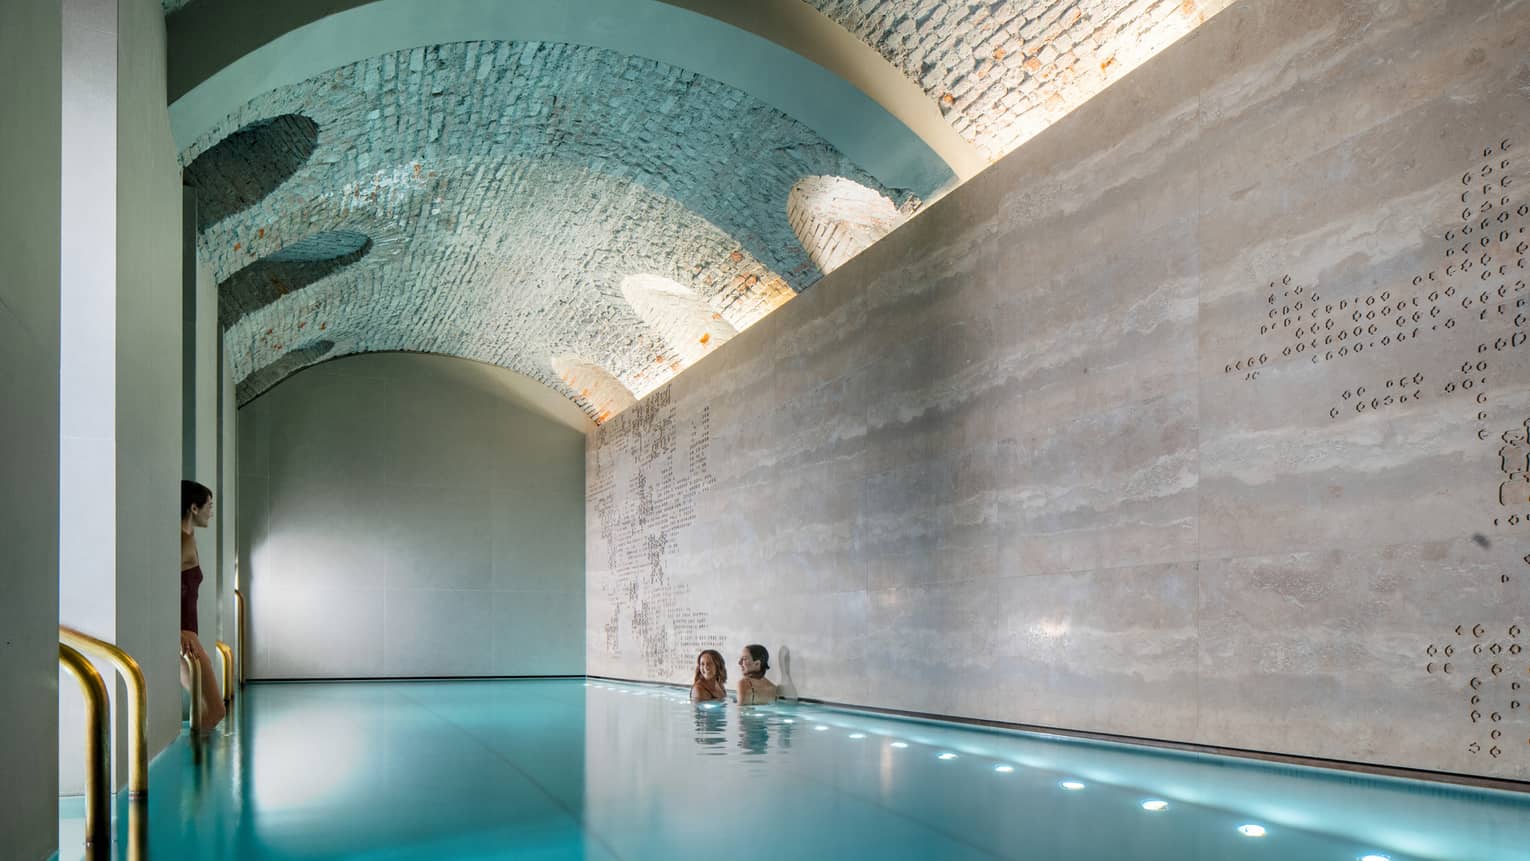 Three women soaking in a modern indoor pool with an arch ceiling